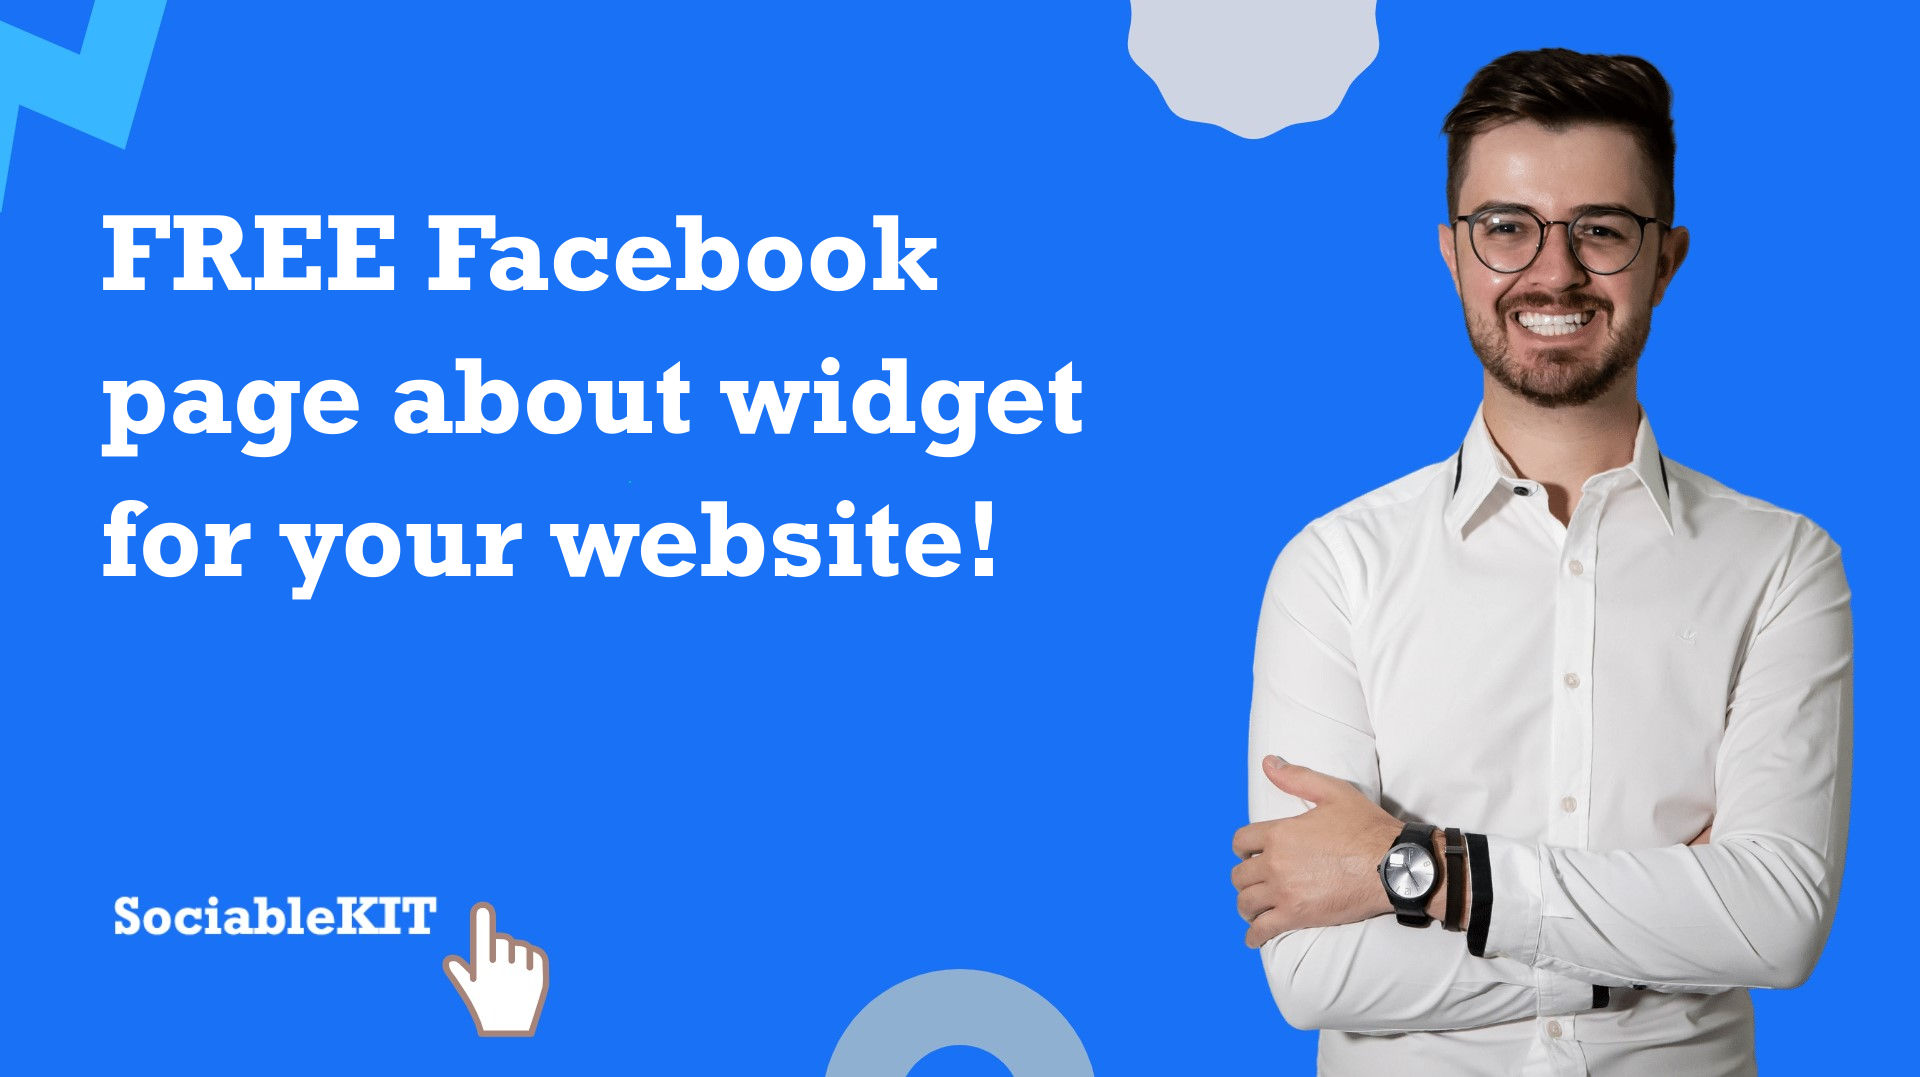 Free Facebook page about widget for your website